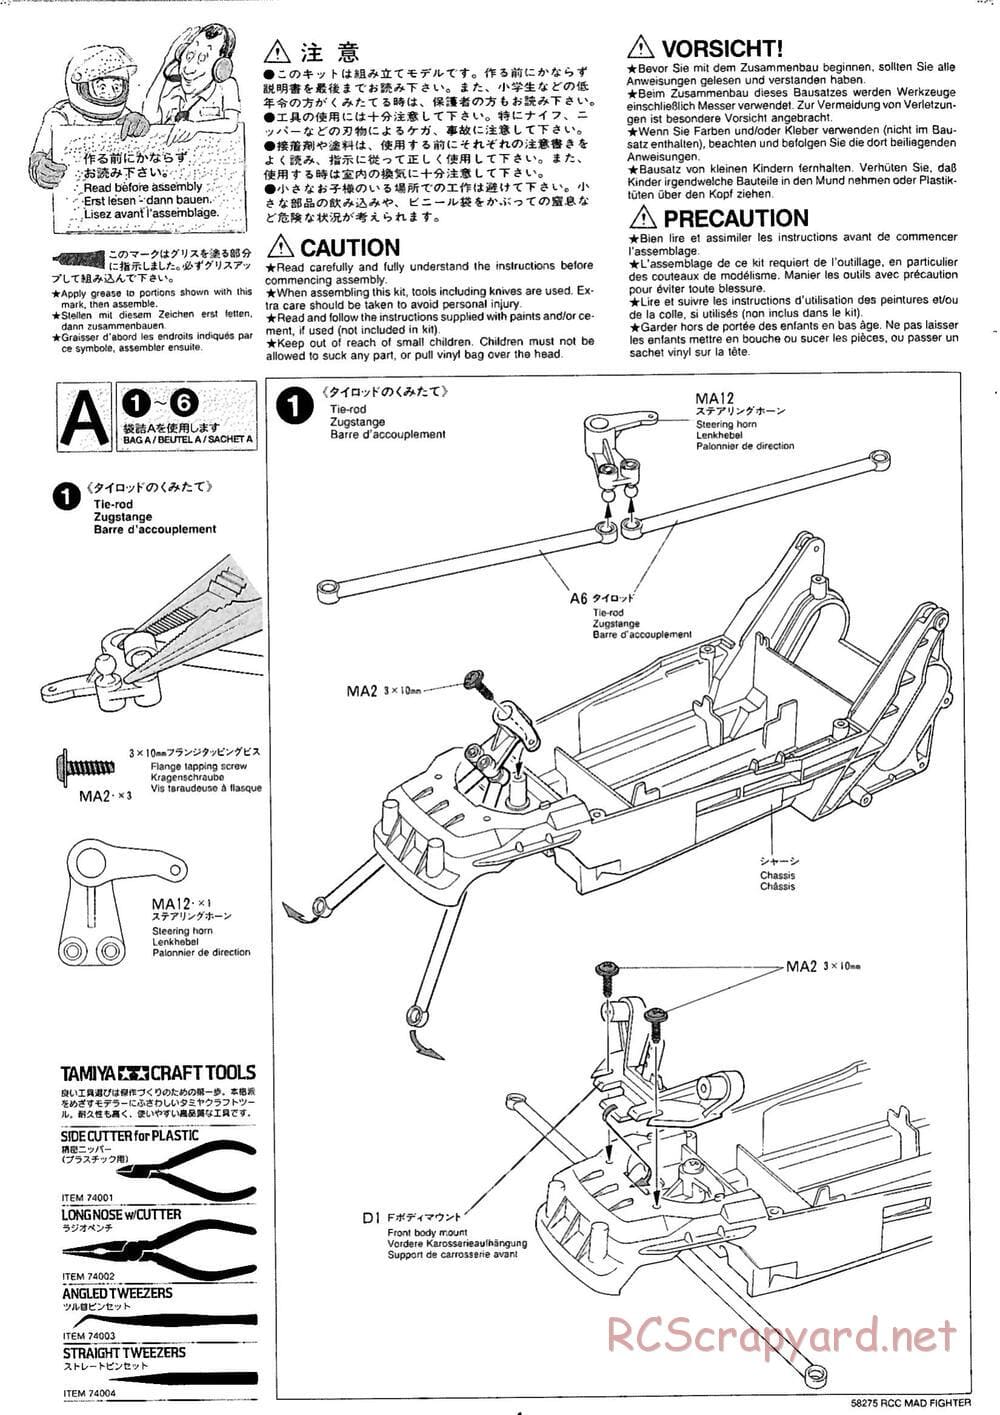 Tamiya - Mad Fighter Chassis - Manual - Page 4